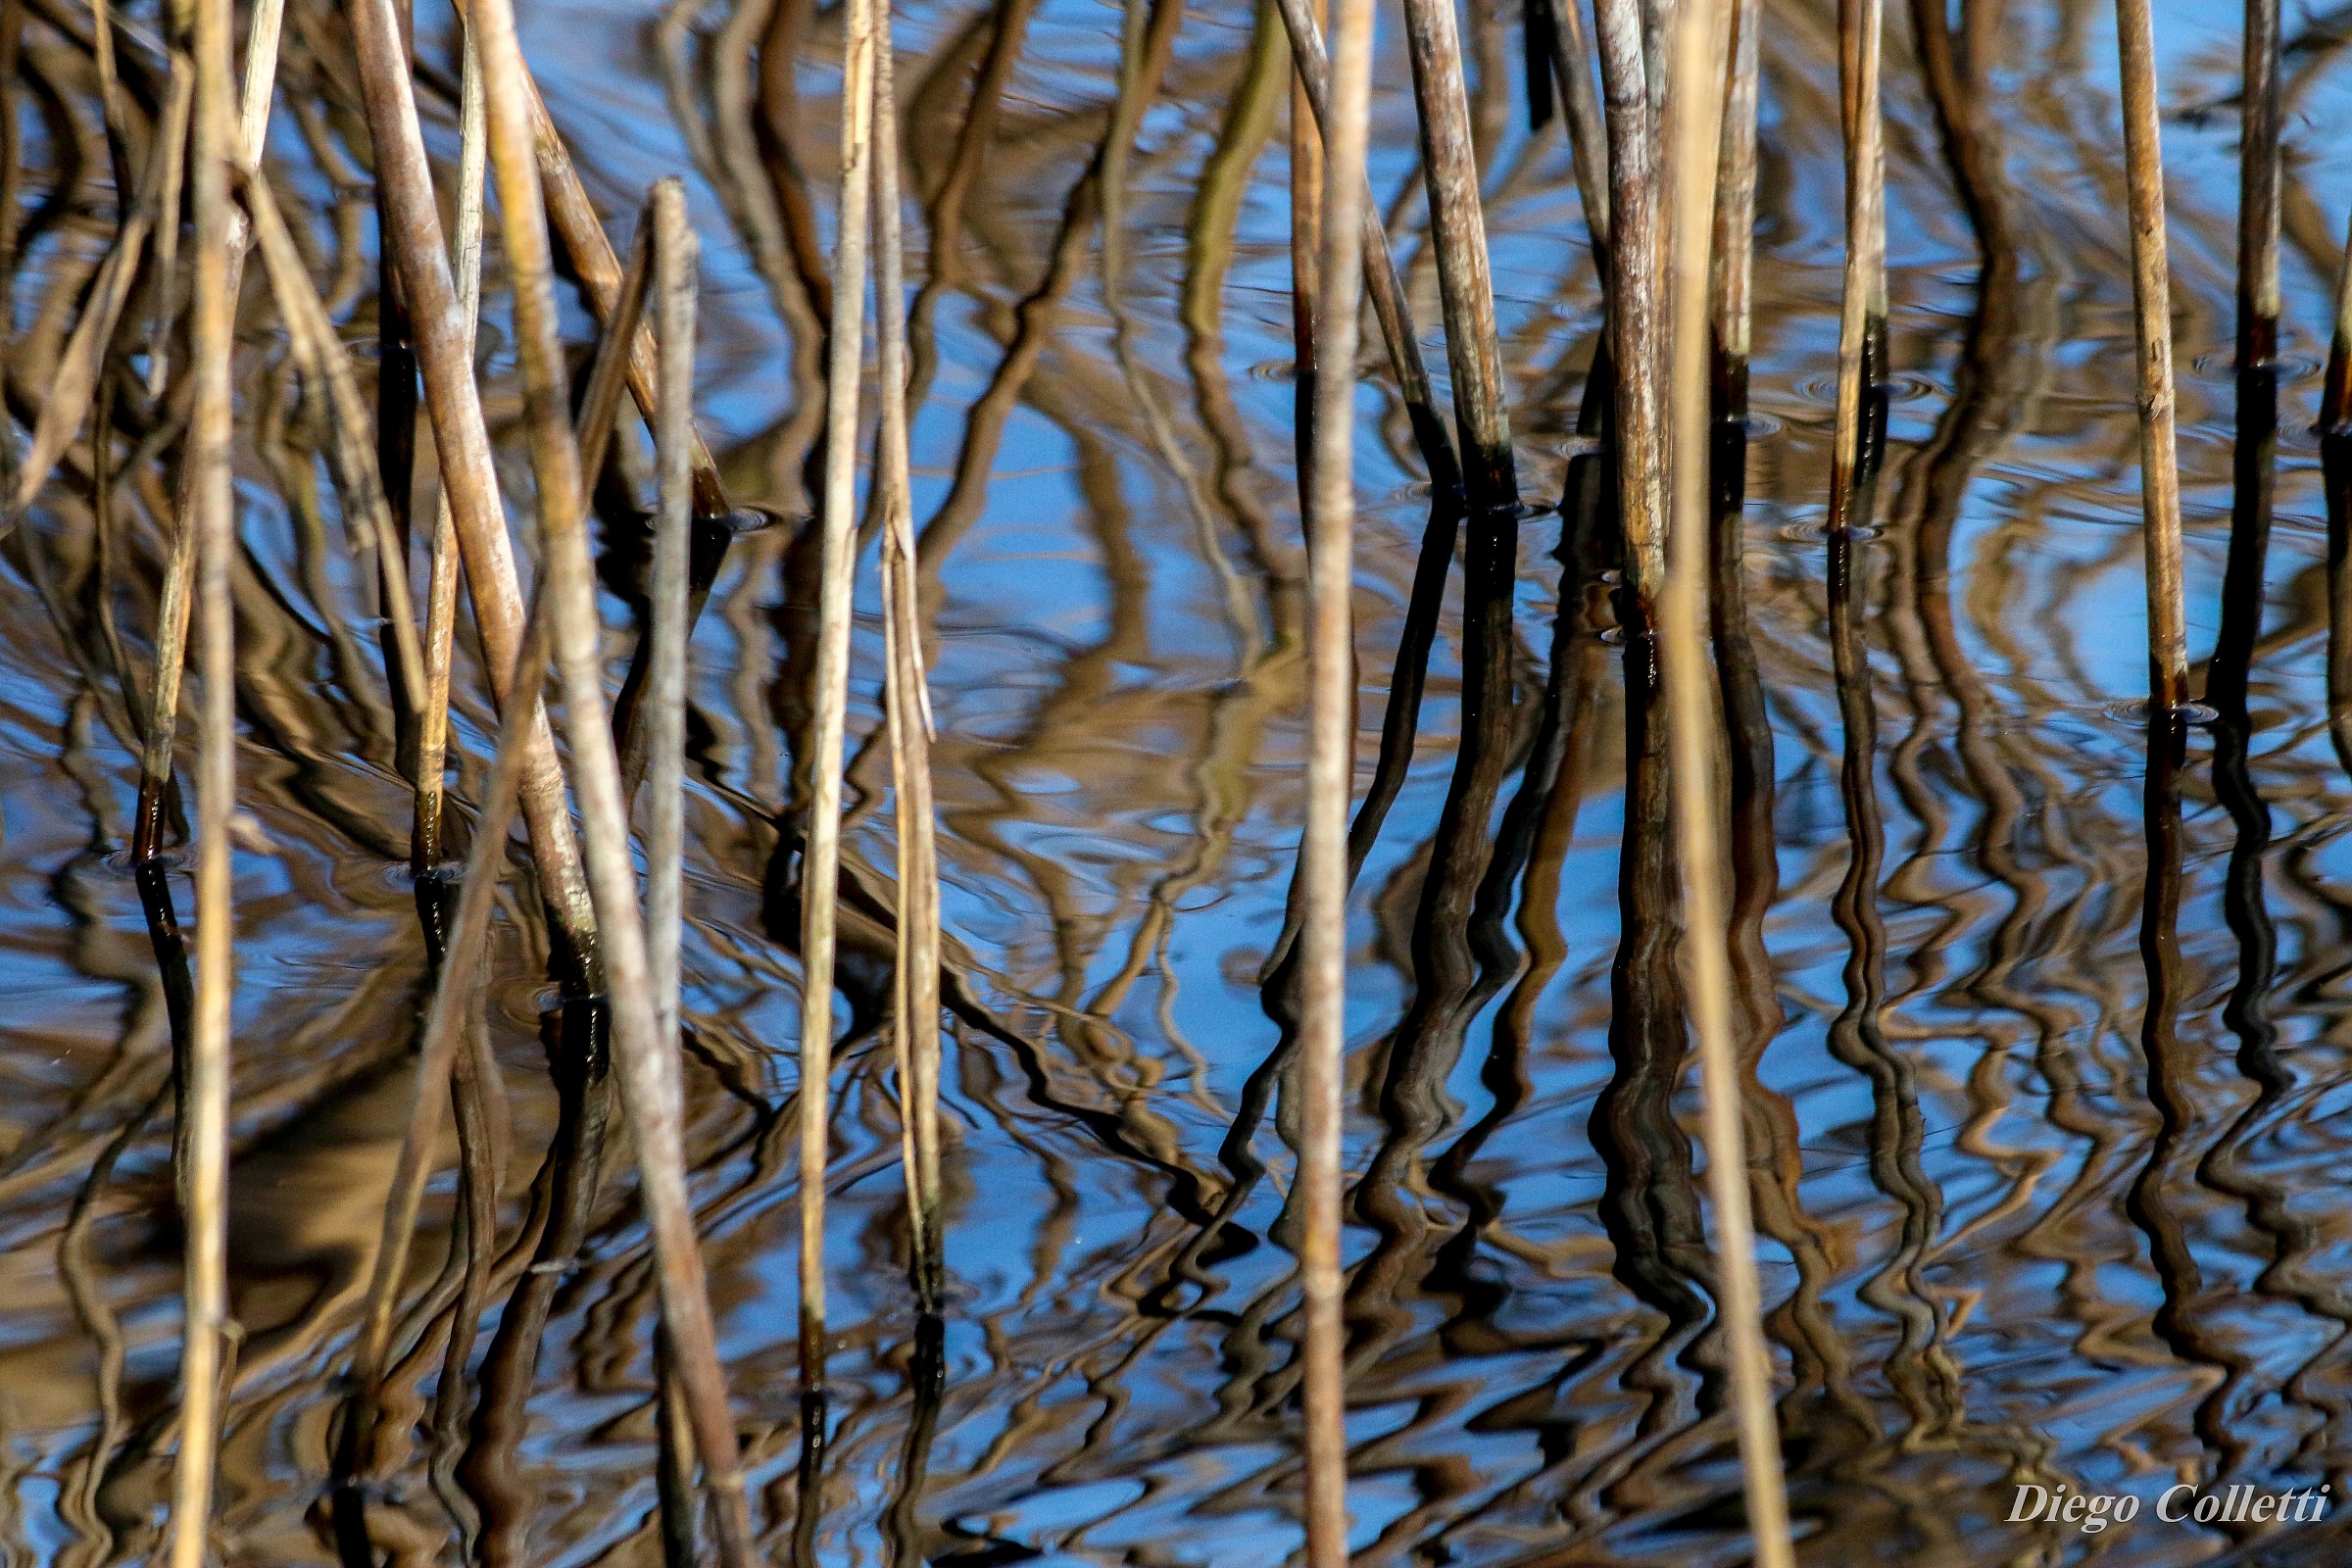 reflections in the reeds...